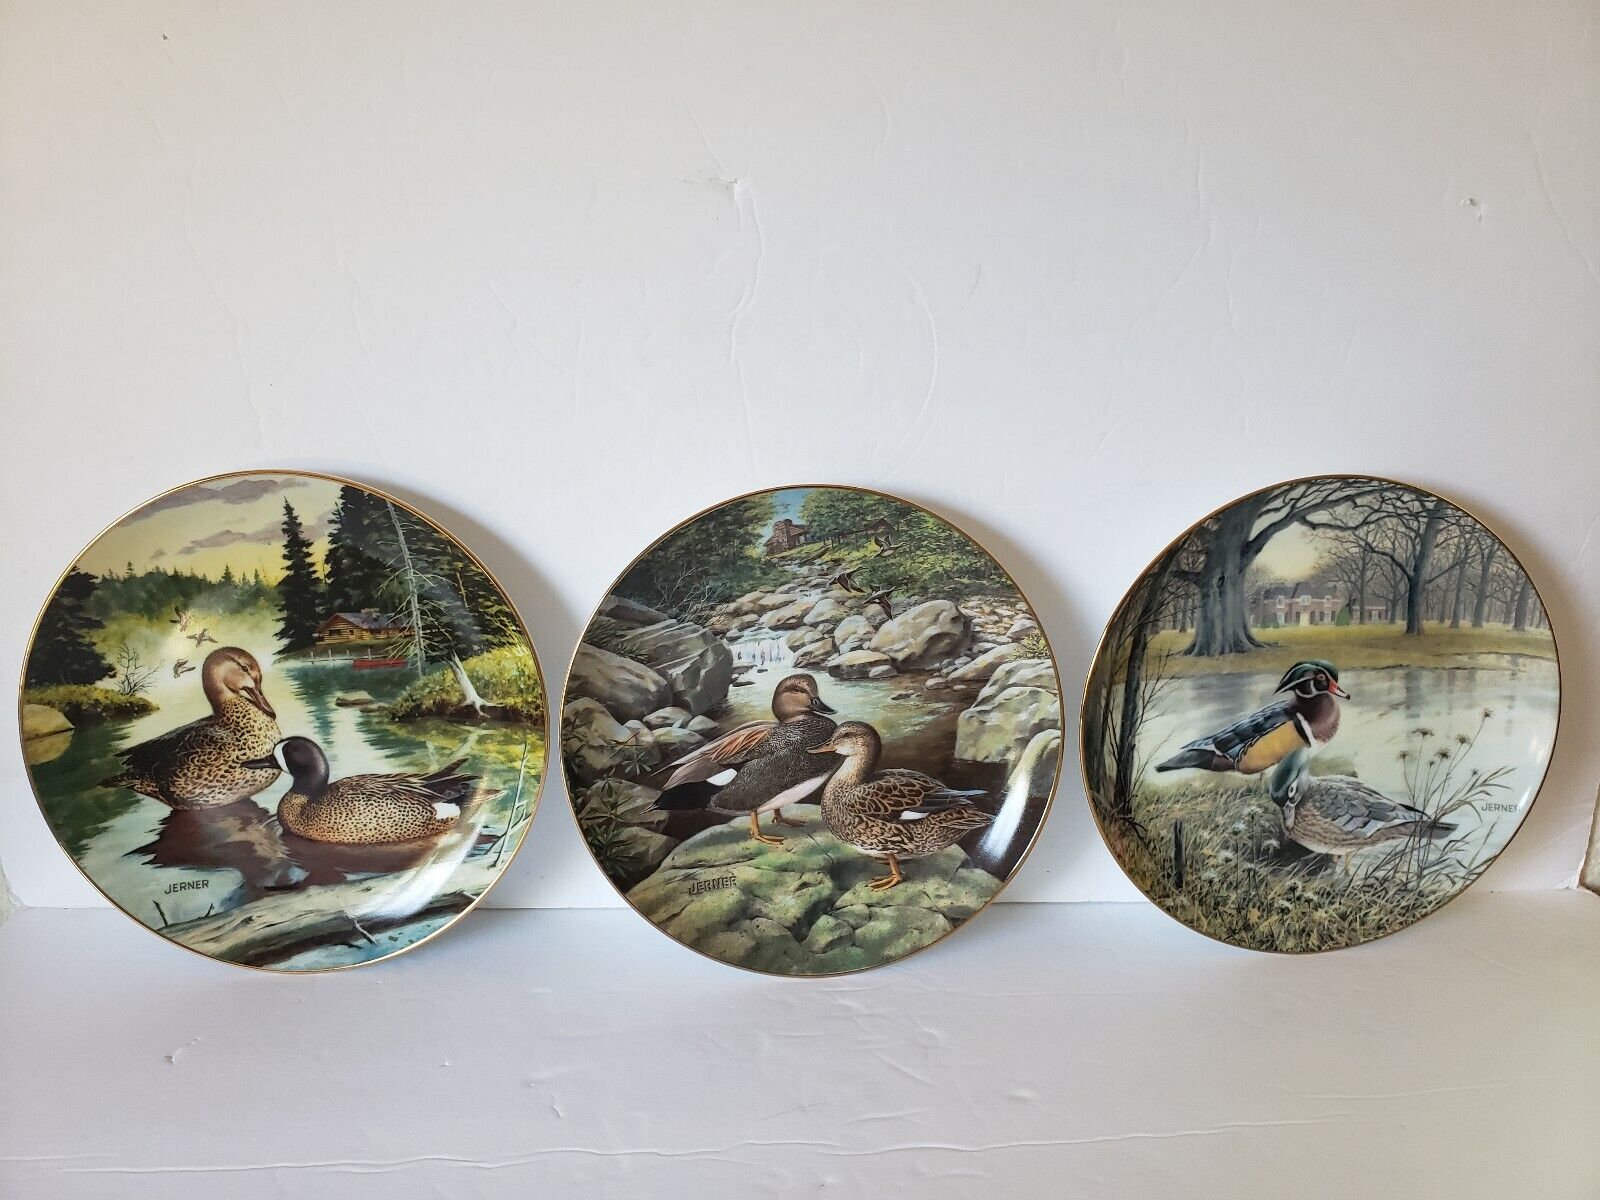 1987 Living With Nature By Bart Jerner Set of 3 Plates